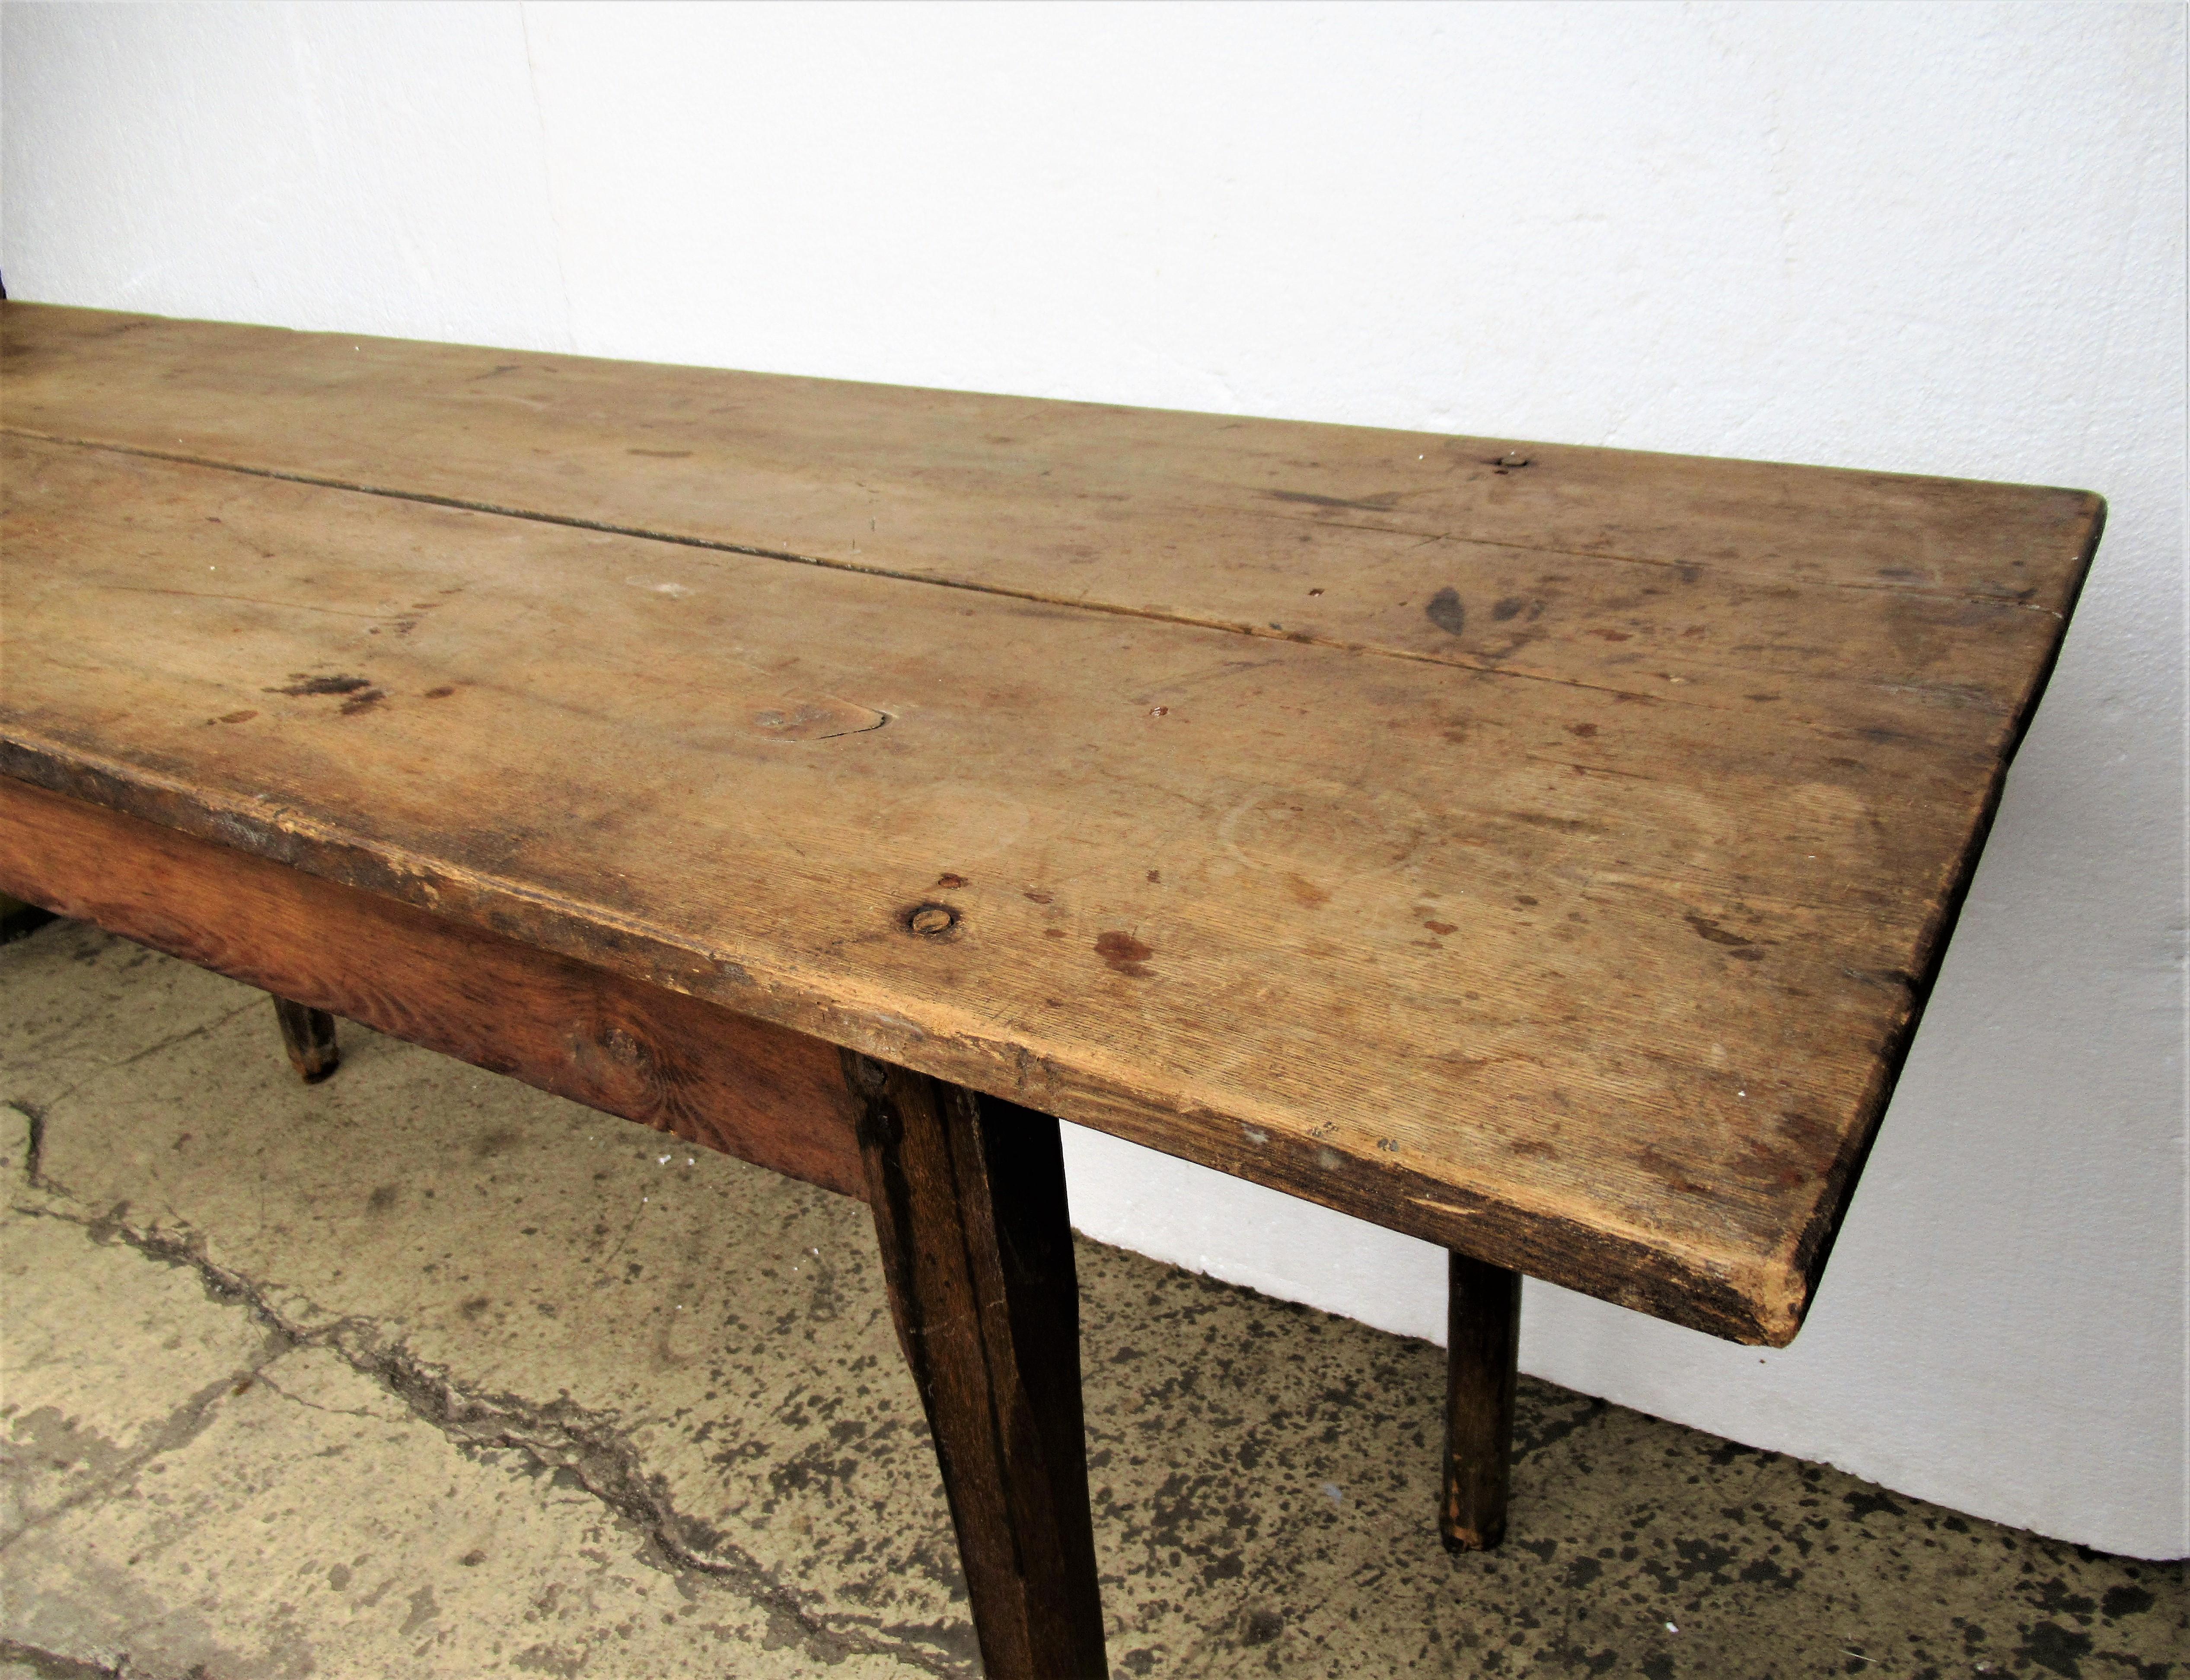 Antique 19th century American farm work table with a long over hanging two board pale chestnut top. Early pegged construction and nicely tapered chamfered legs. Beautifully aged original old surface color and great form.
 Found in Central New York